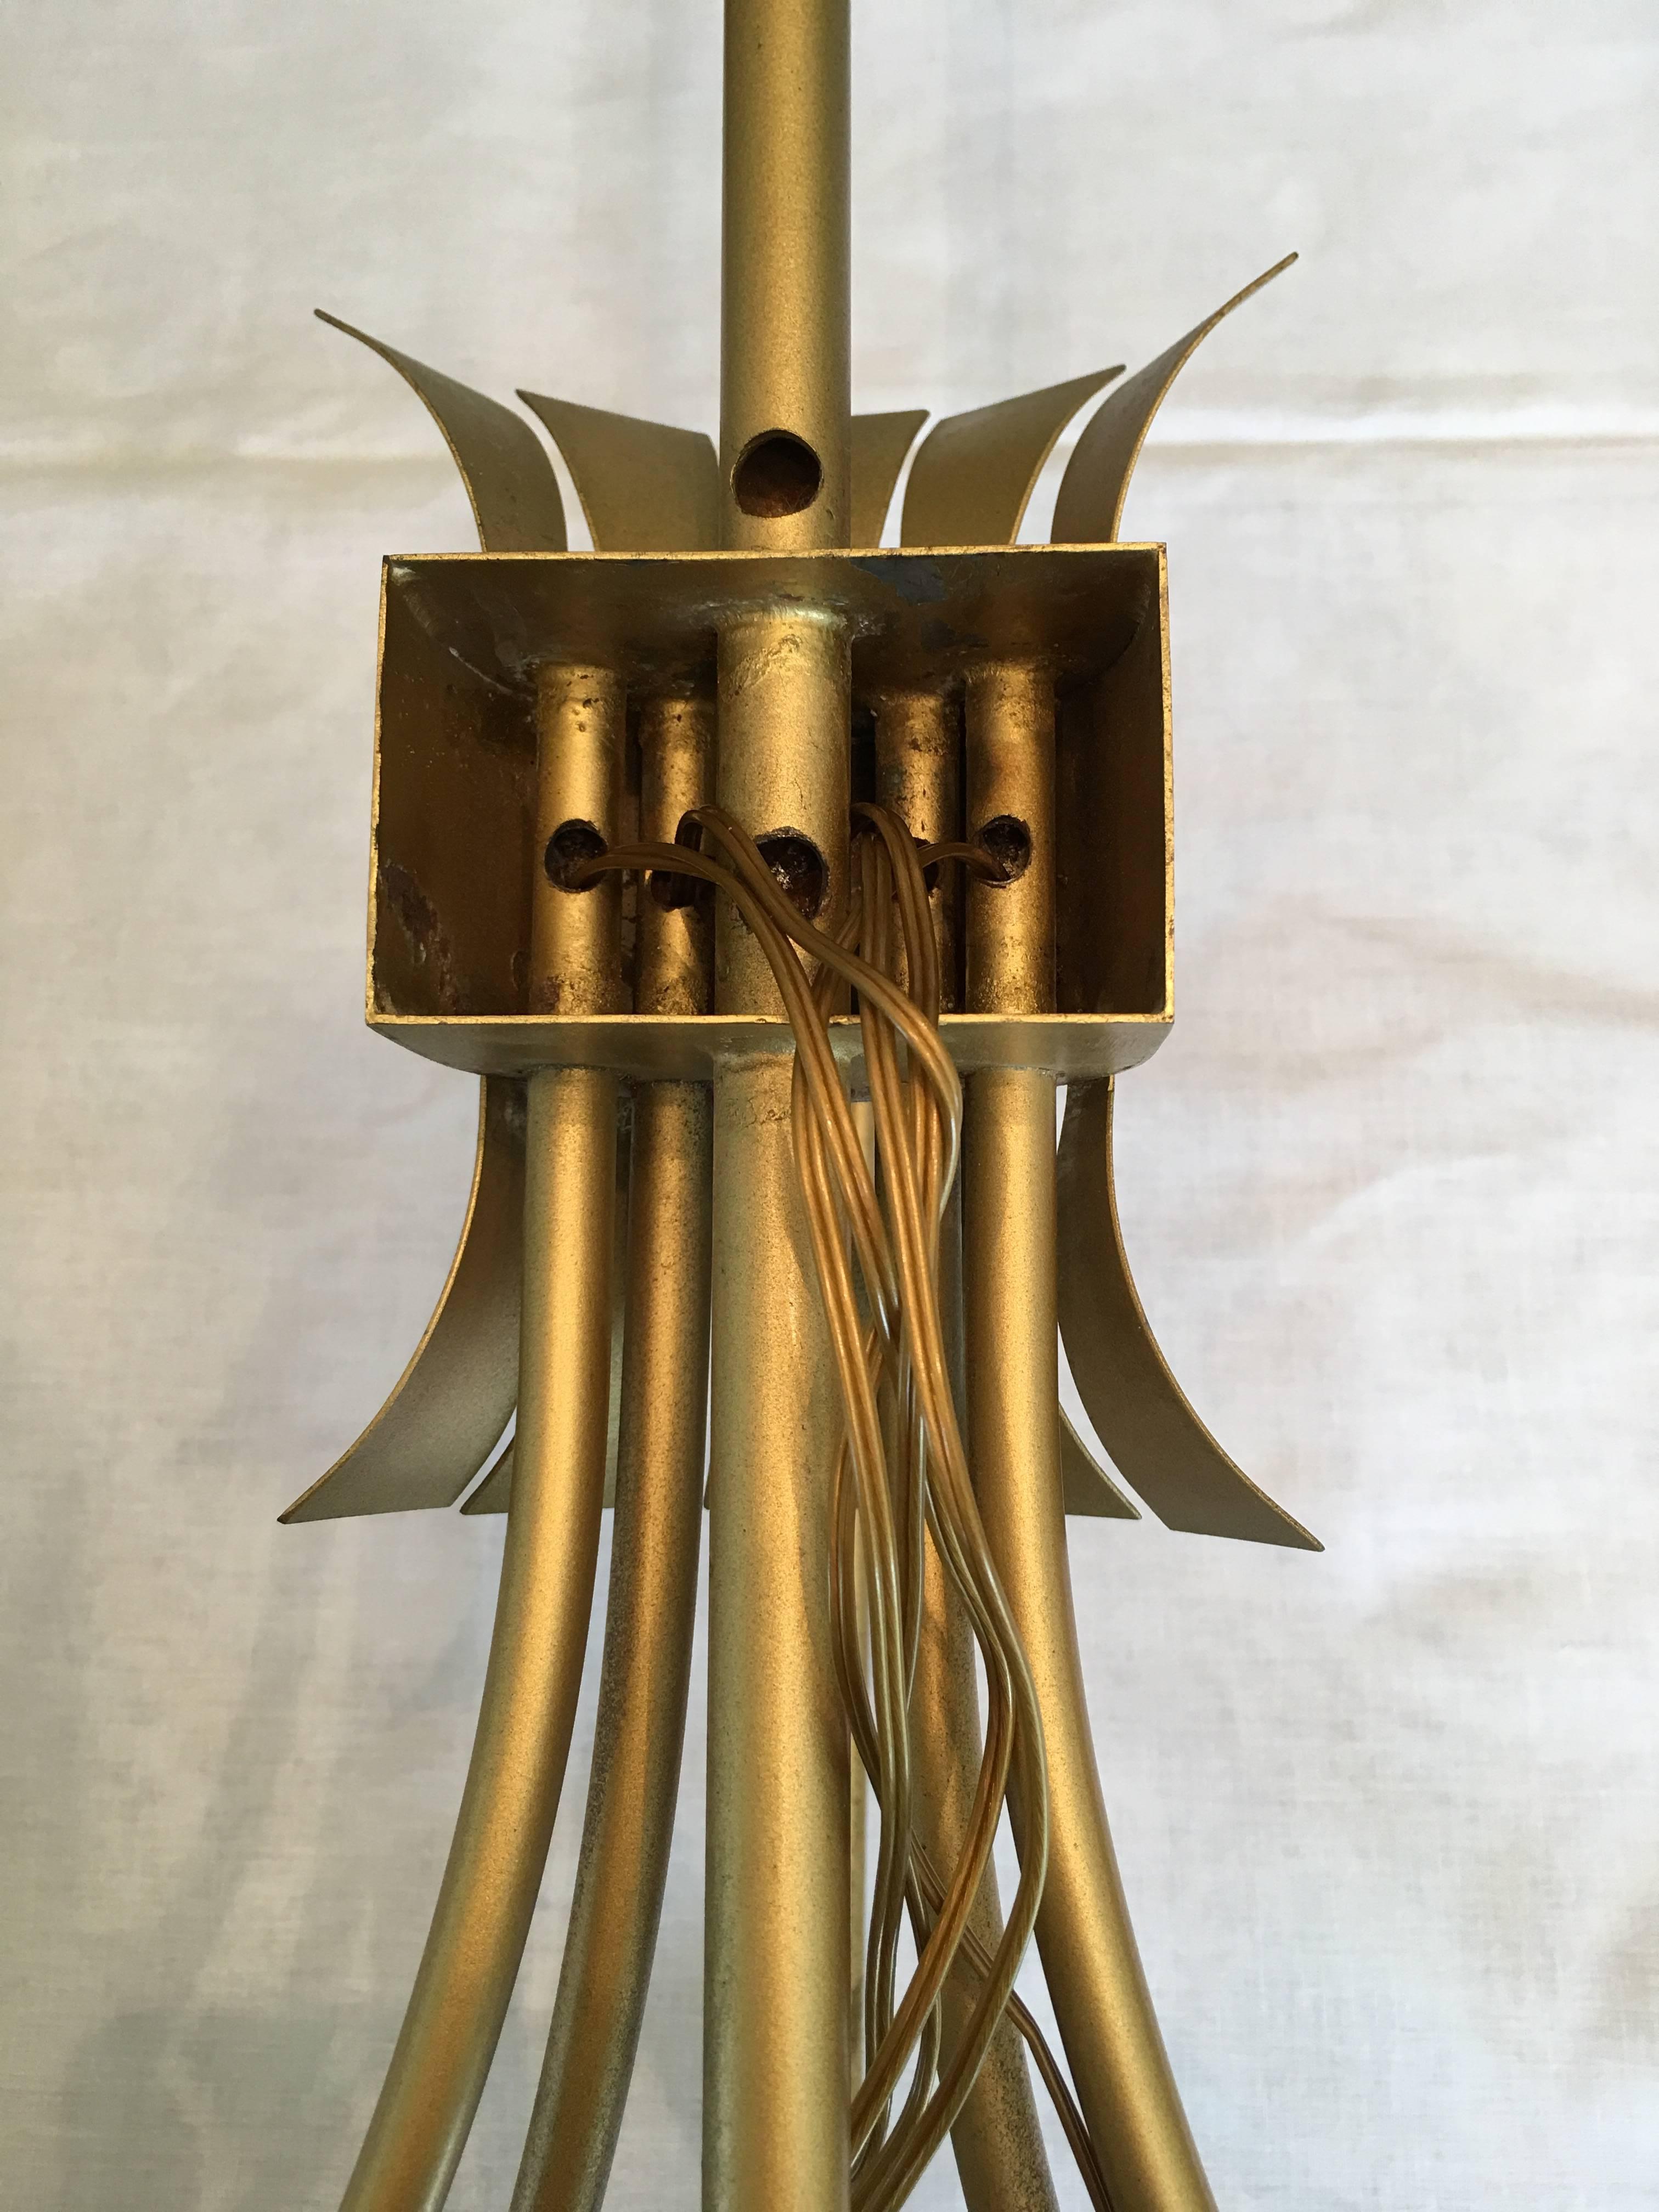 Four Monumental French Theater Sconces, Five Gilt Metal Curved Arms - 1950s For Sale 13